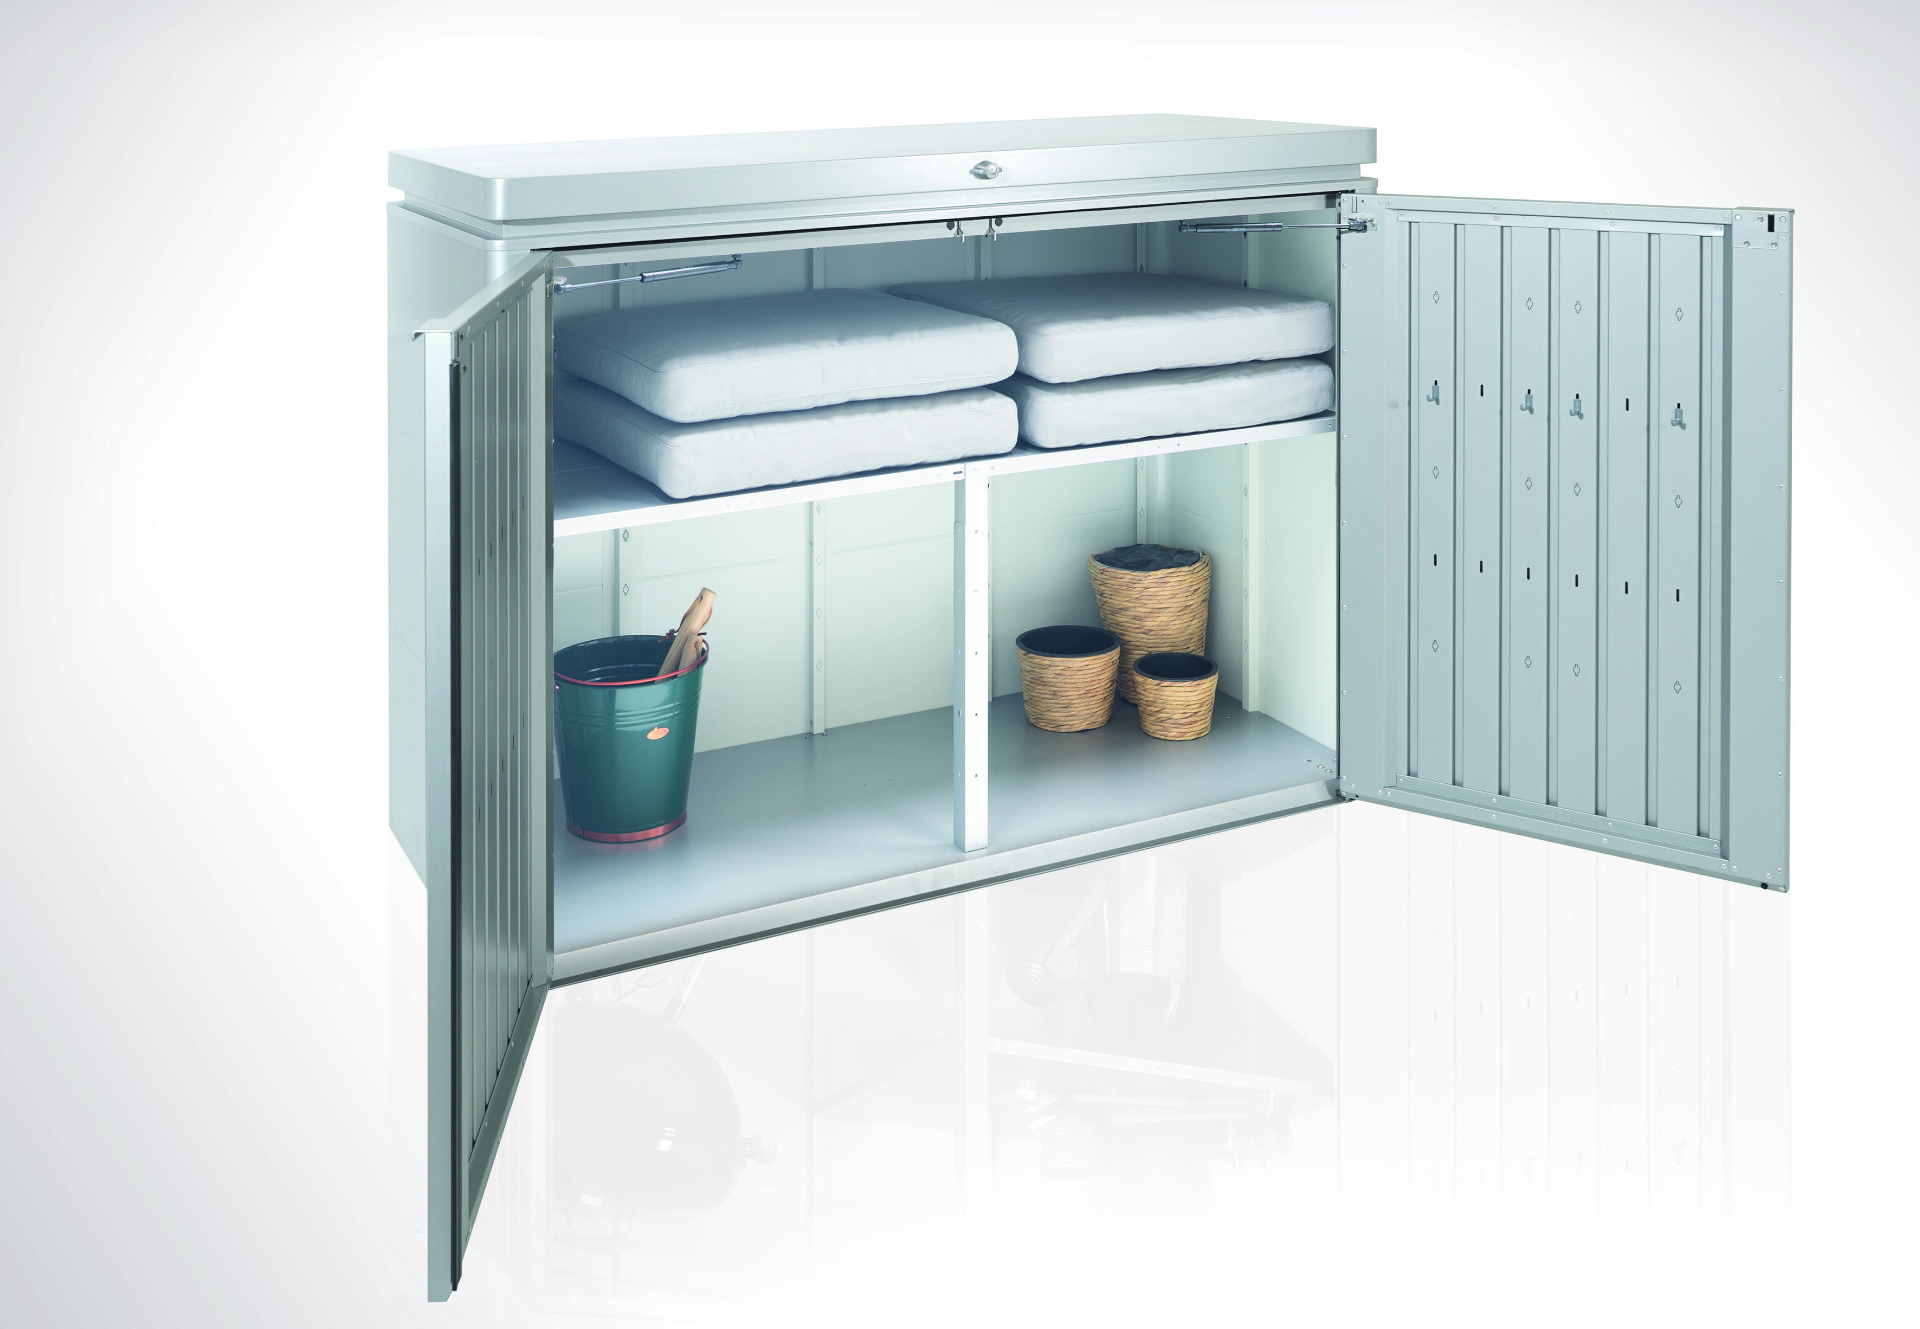 The Biohort HighBoard is a multi-functional garden storage unit, safe, secure and rainproof. From € 1,700.00 at Owen Chubb GardenStudio.